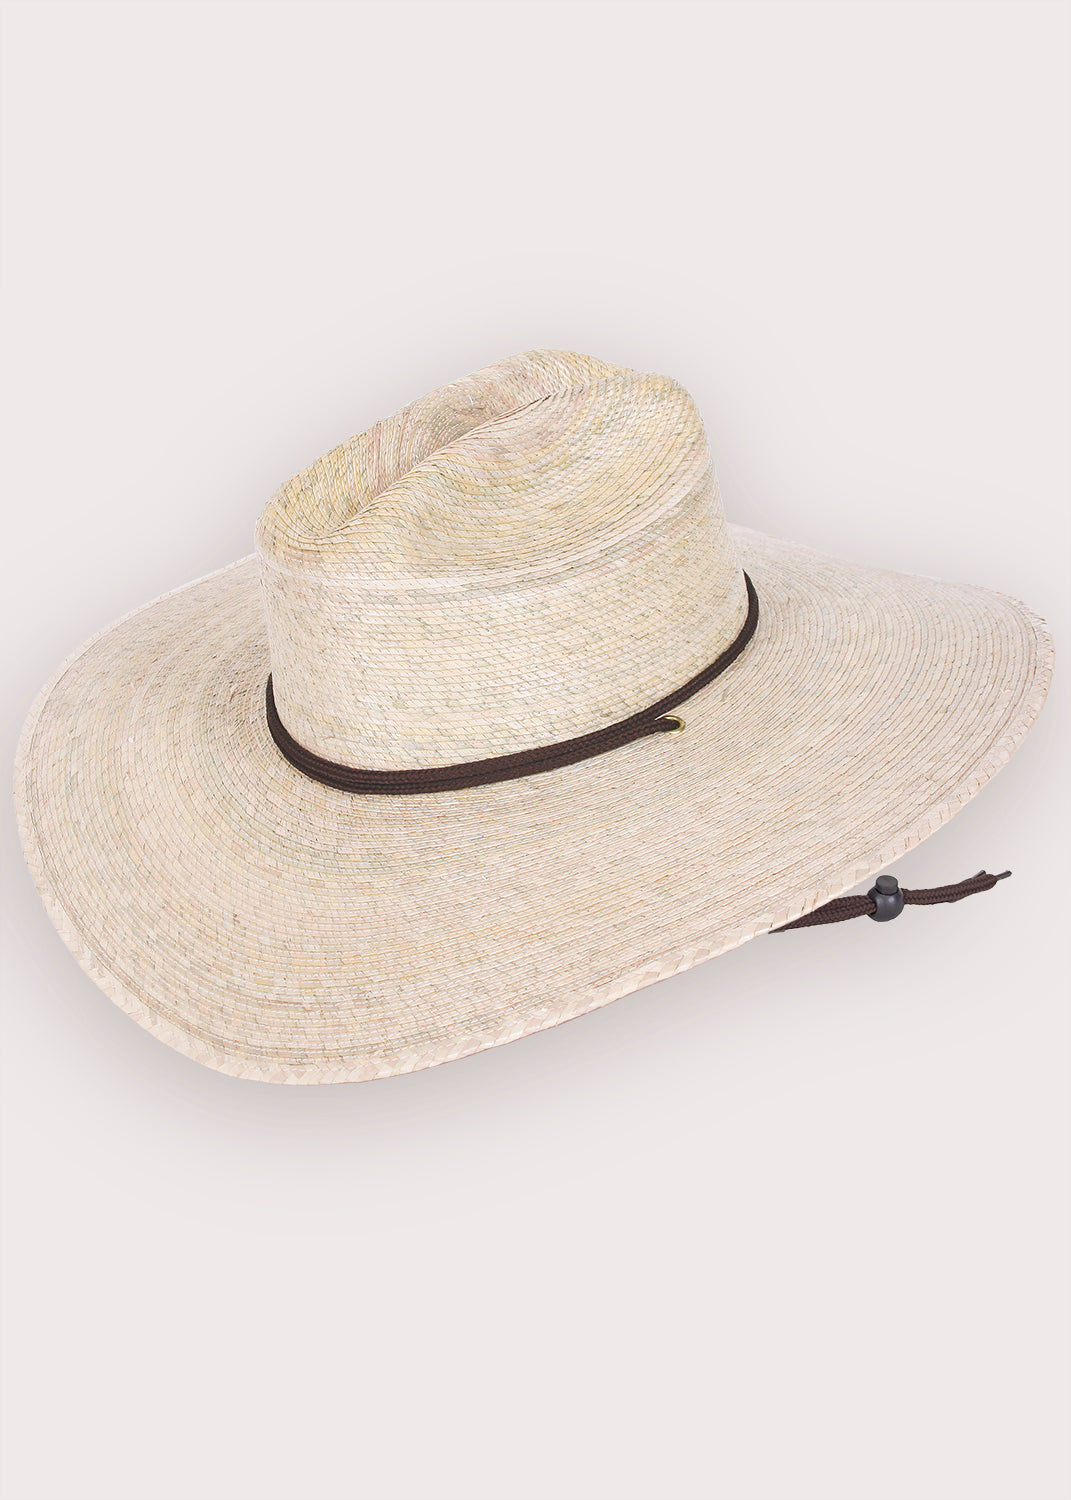 Men's Straw Outback Lifeguard Sun Hat Natural Beach Large Wide Brim w/ Chin Cord 